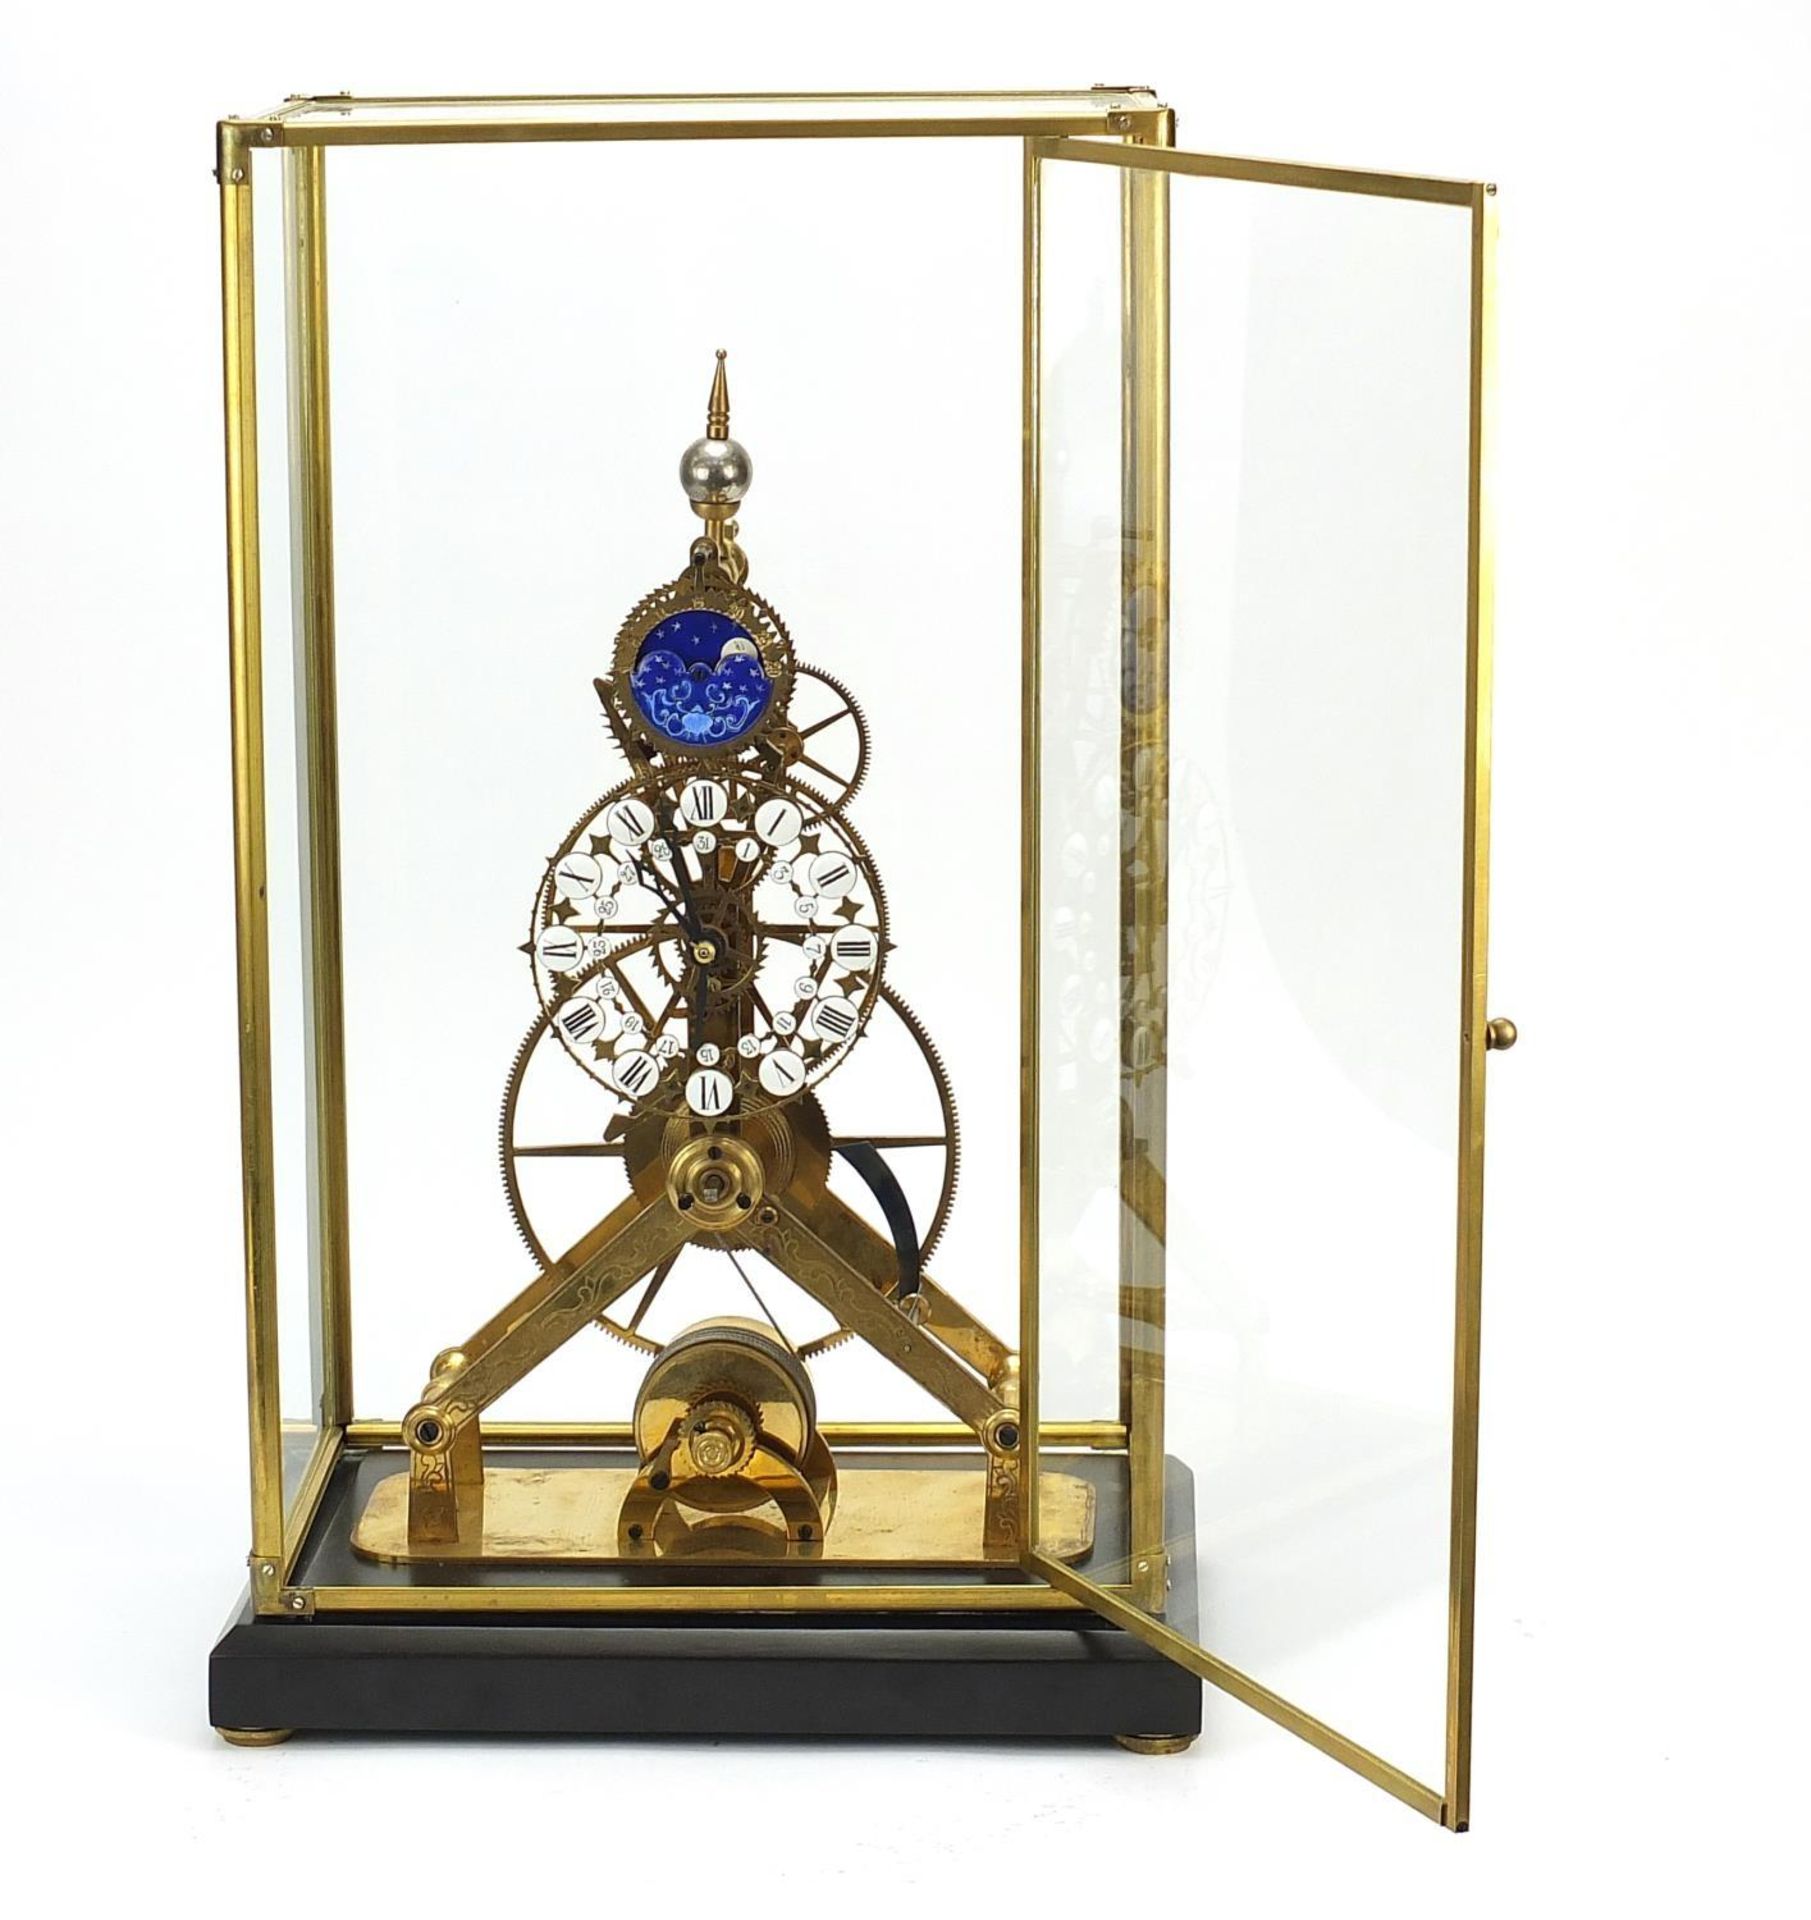 Gothic style brass skeleton clock with moon face dial and glass display case, with key and pendulum, - Image 5 of 6